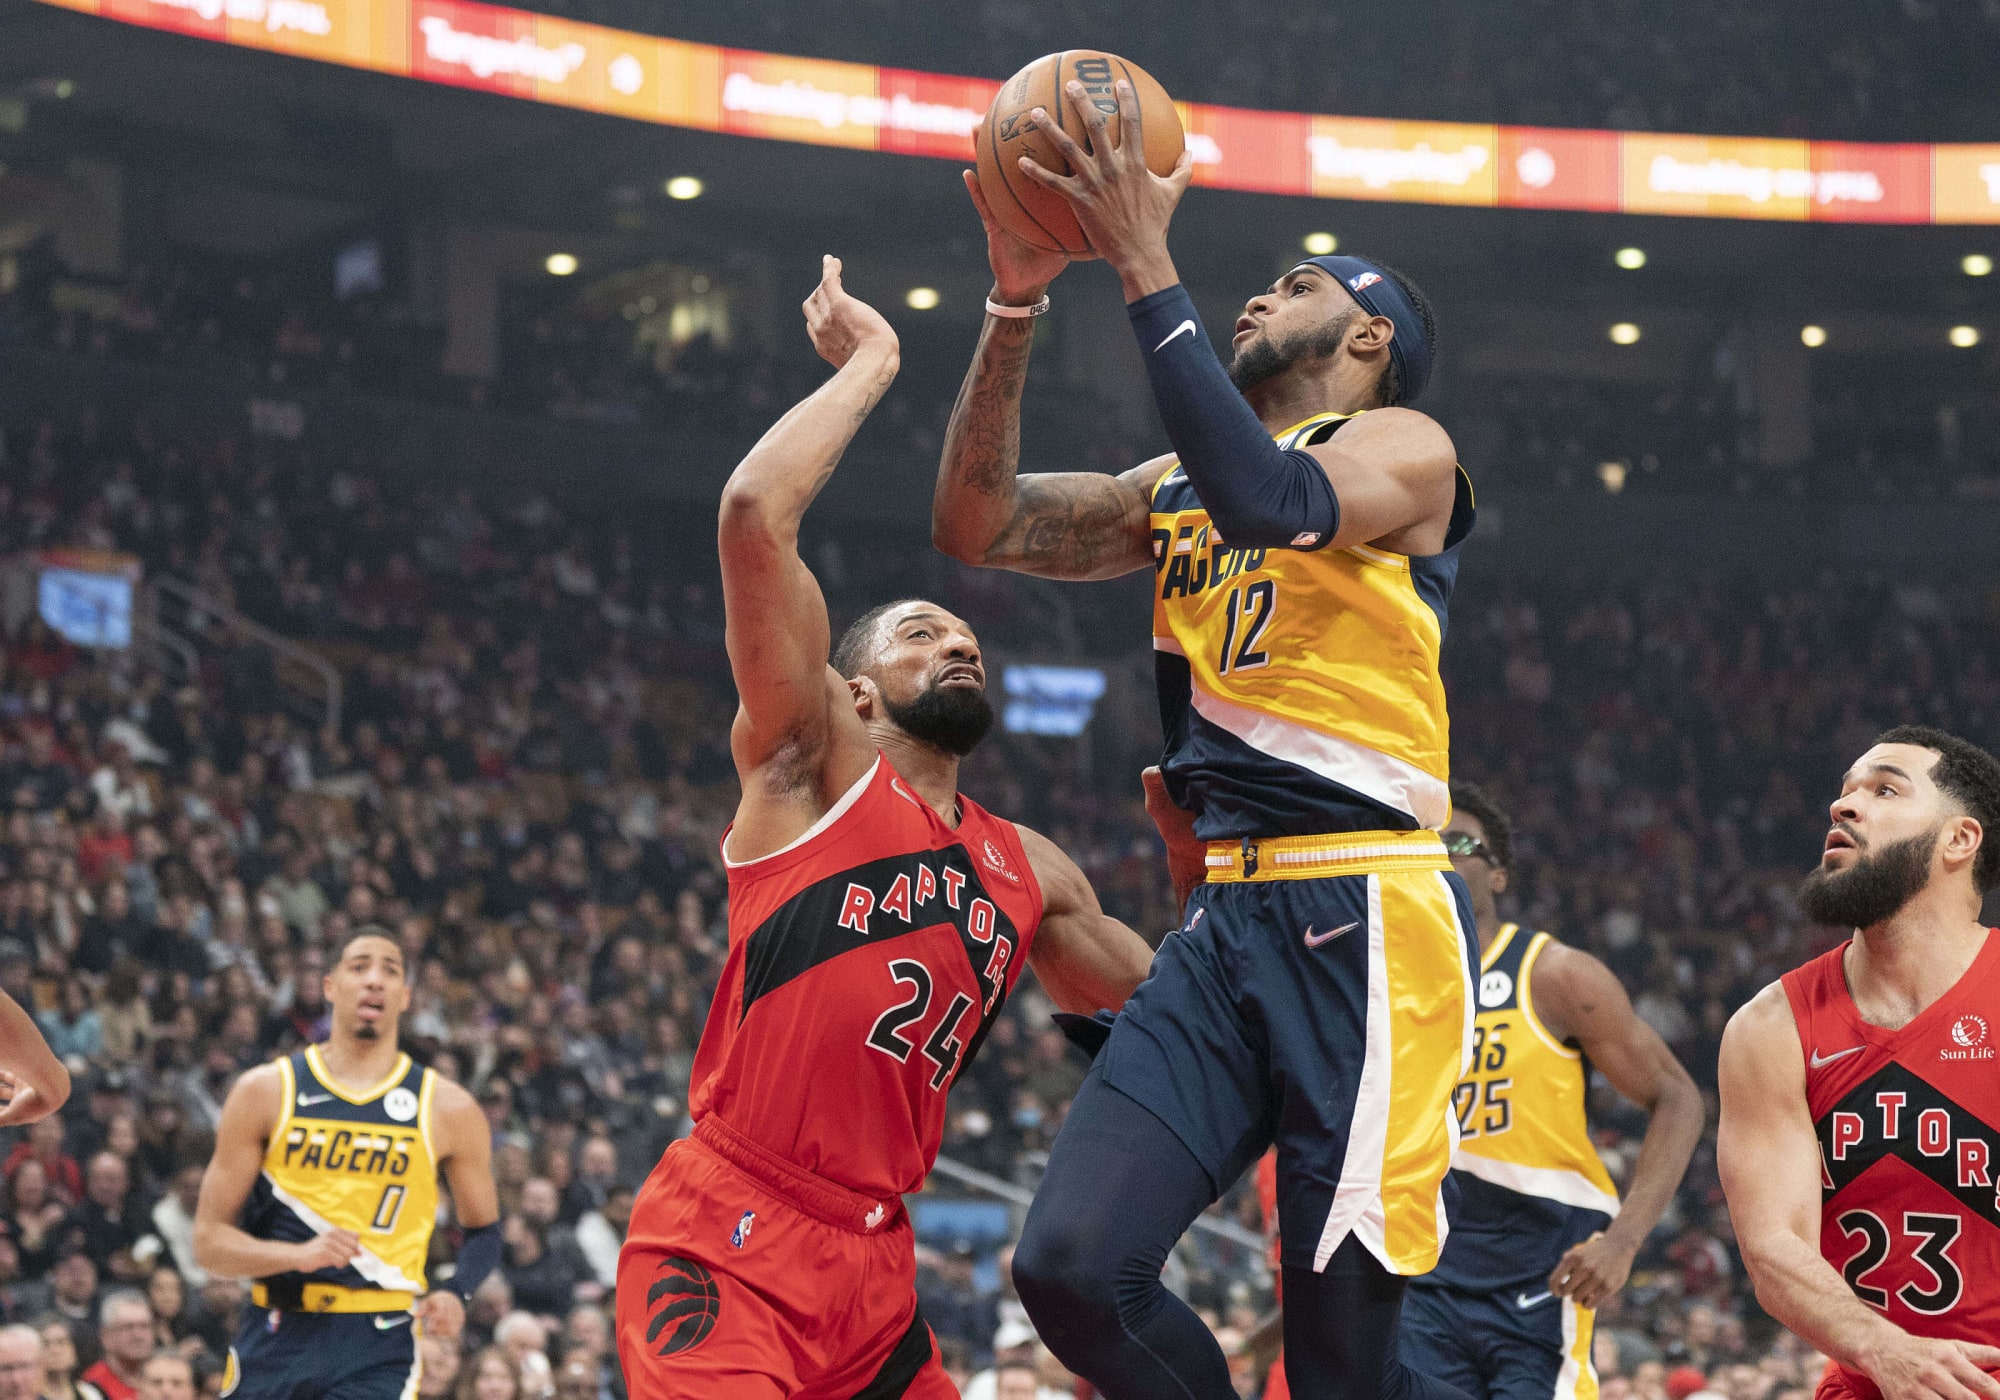 Speaker catches fire at Raptors-Pacers, forces suspension